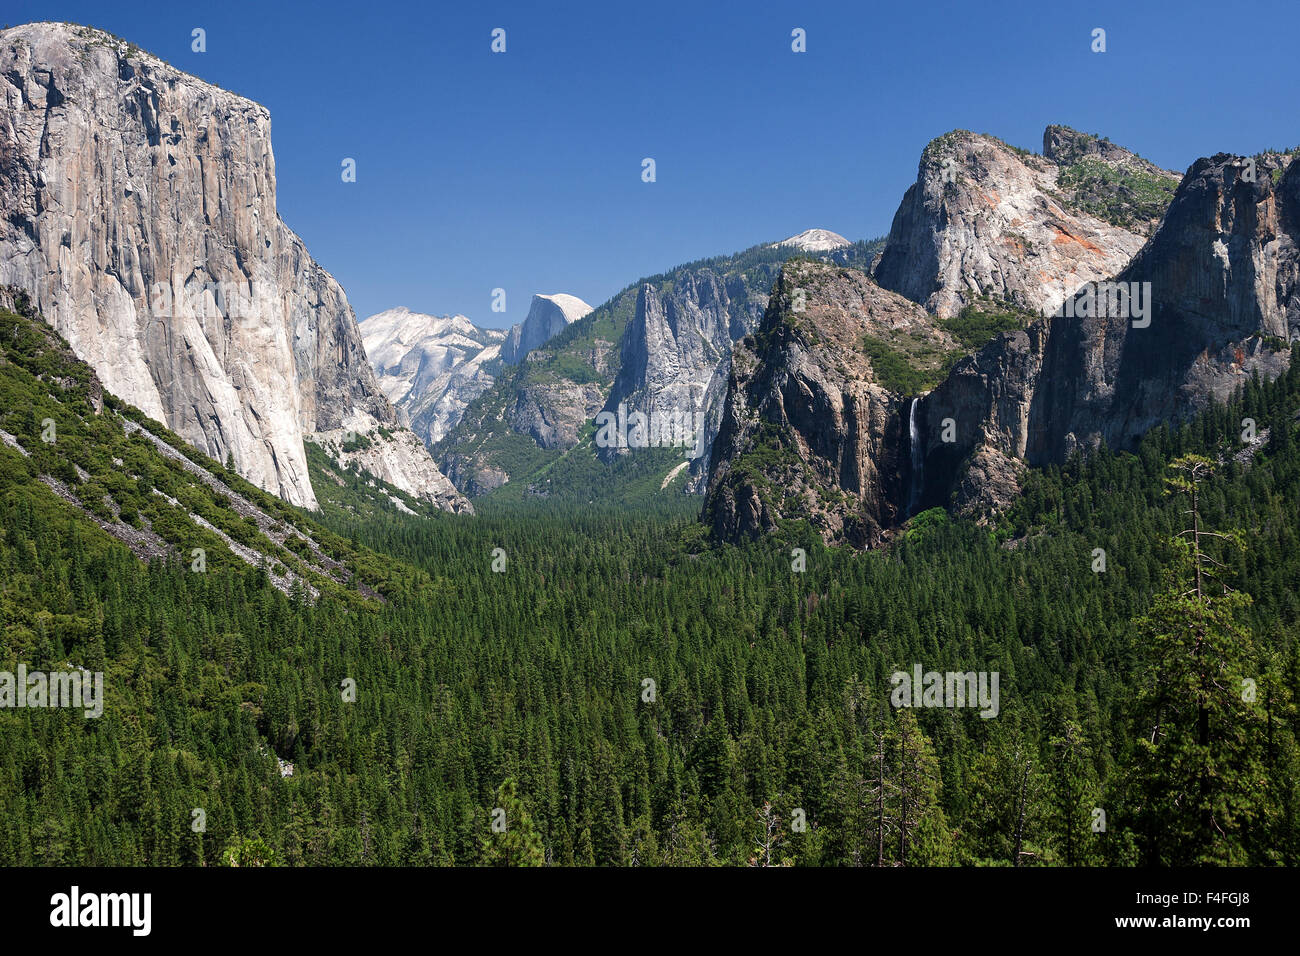 View into Yosemite Valley from Tunnel View, El Capitan left, Yosemite National Park, California, USA Stock Photo